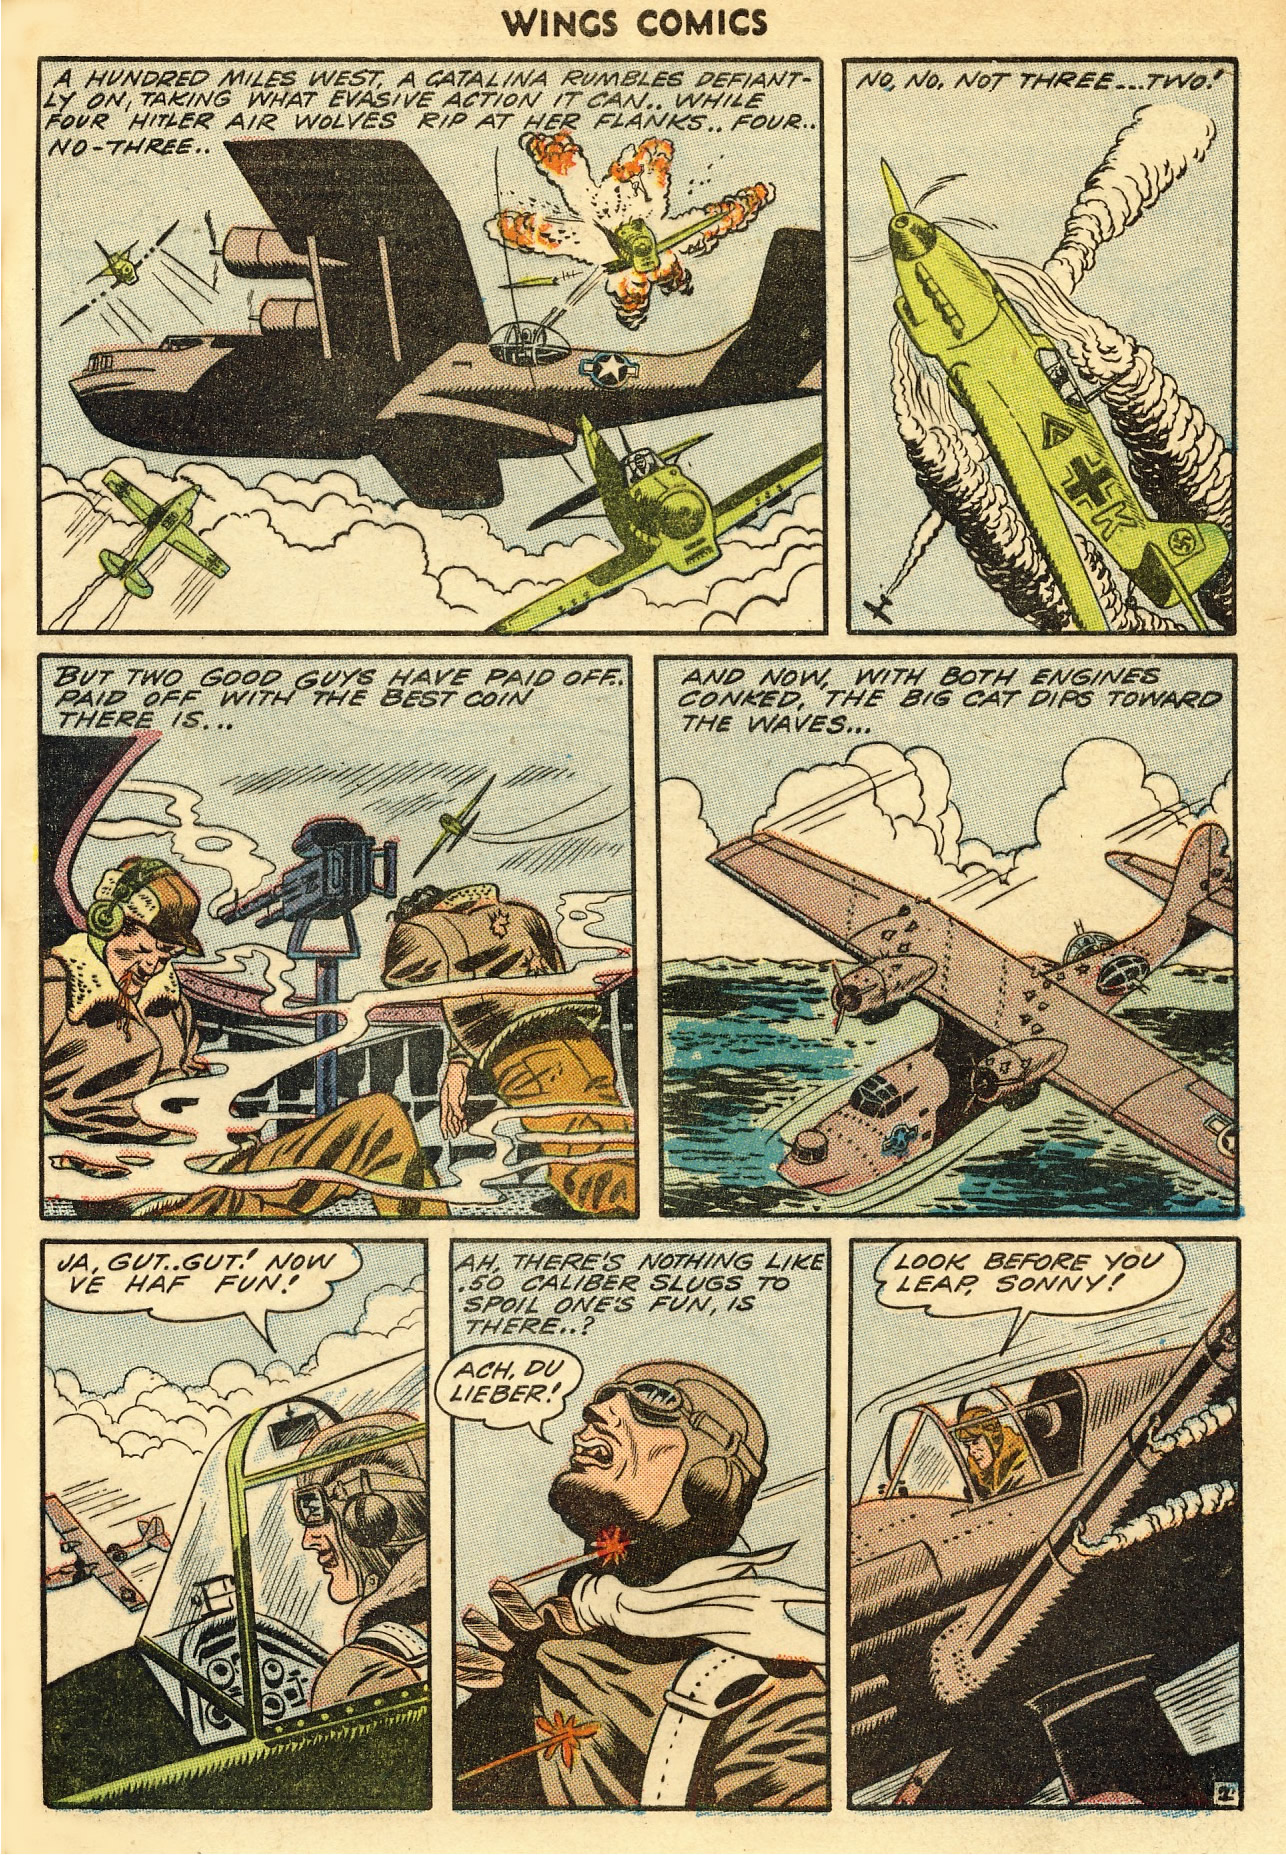 Read online Wings Comics comic -  Issue #46 - 45